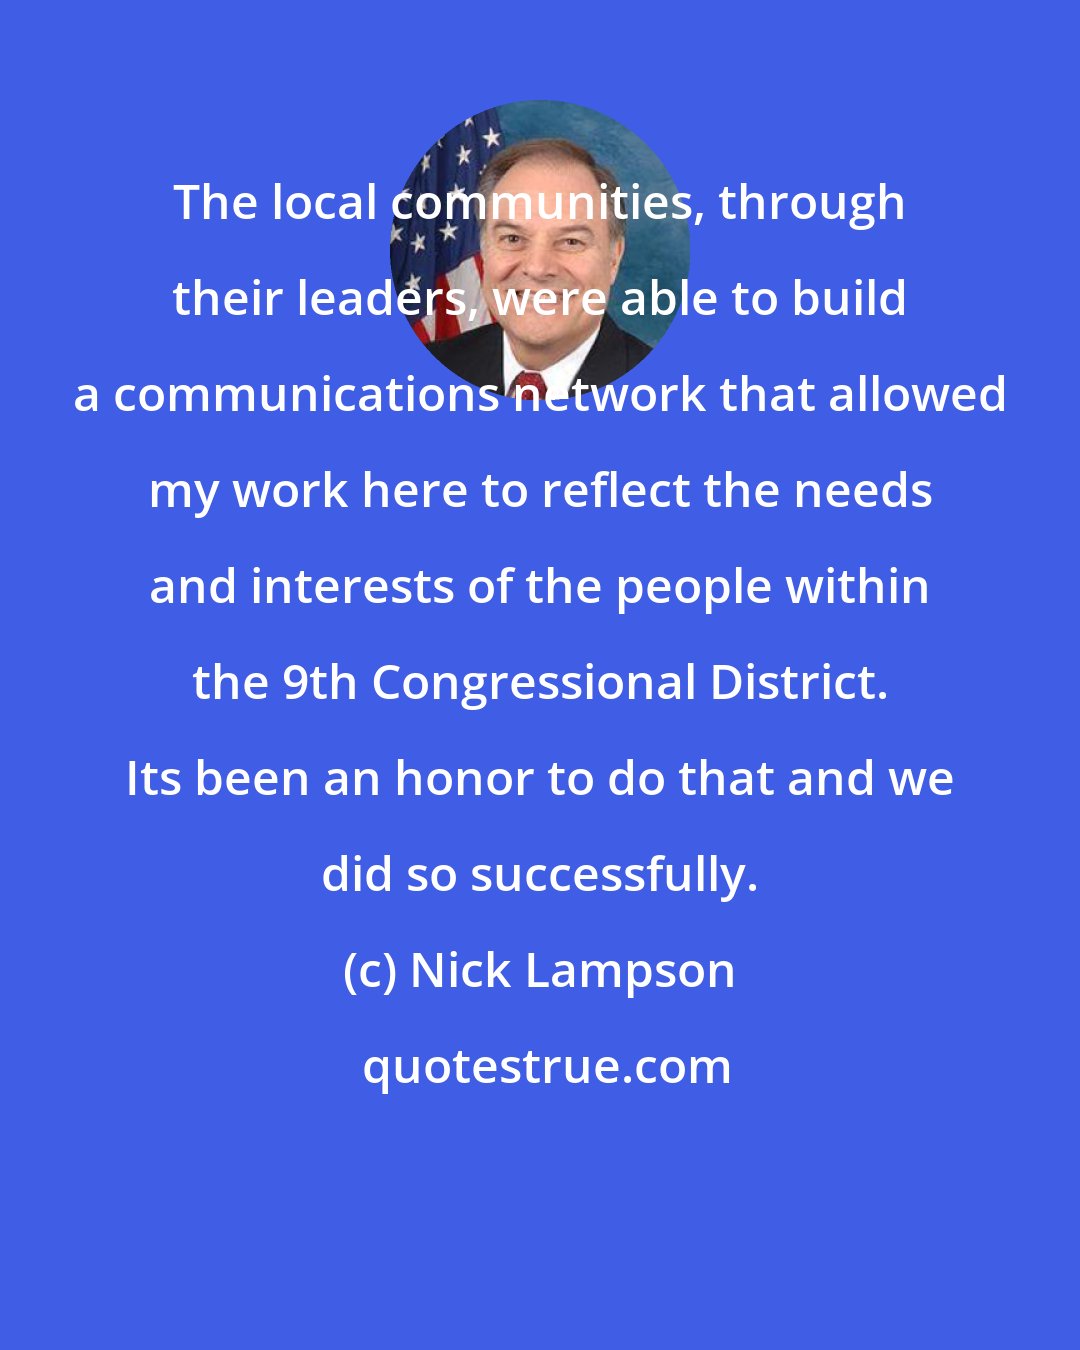 Nick Lampson: The local communities, through their leaders, were able to build a communications network that allowed my work here to reflect the needs and interests of the people within the 9th Congressional District. Its been an honor to do that and we did so successfully.